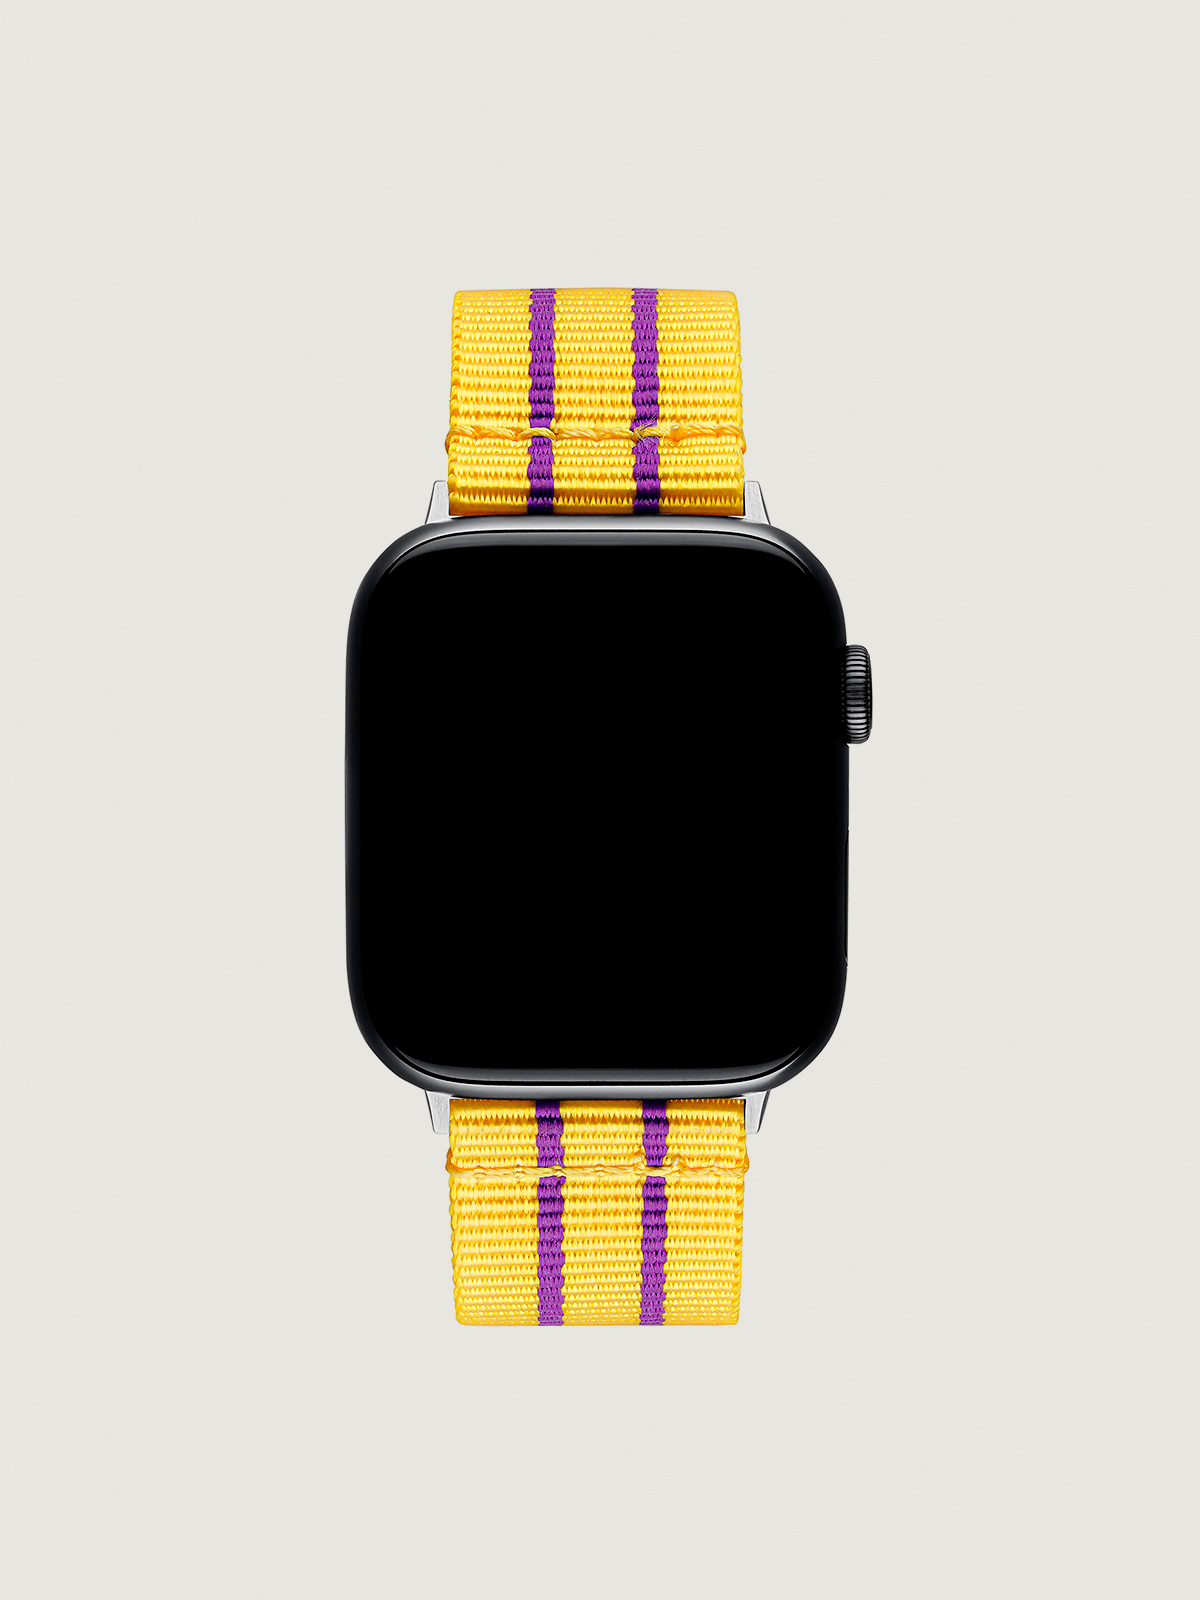 Nylon strap for Apple Watch with yellow and purple stripes.